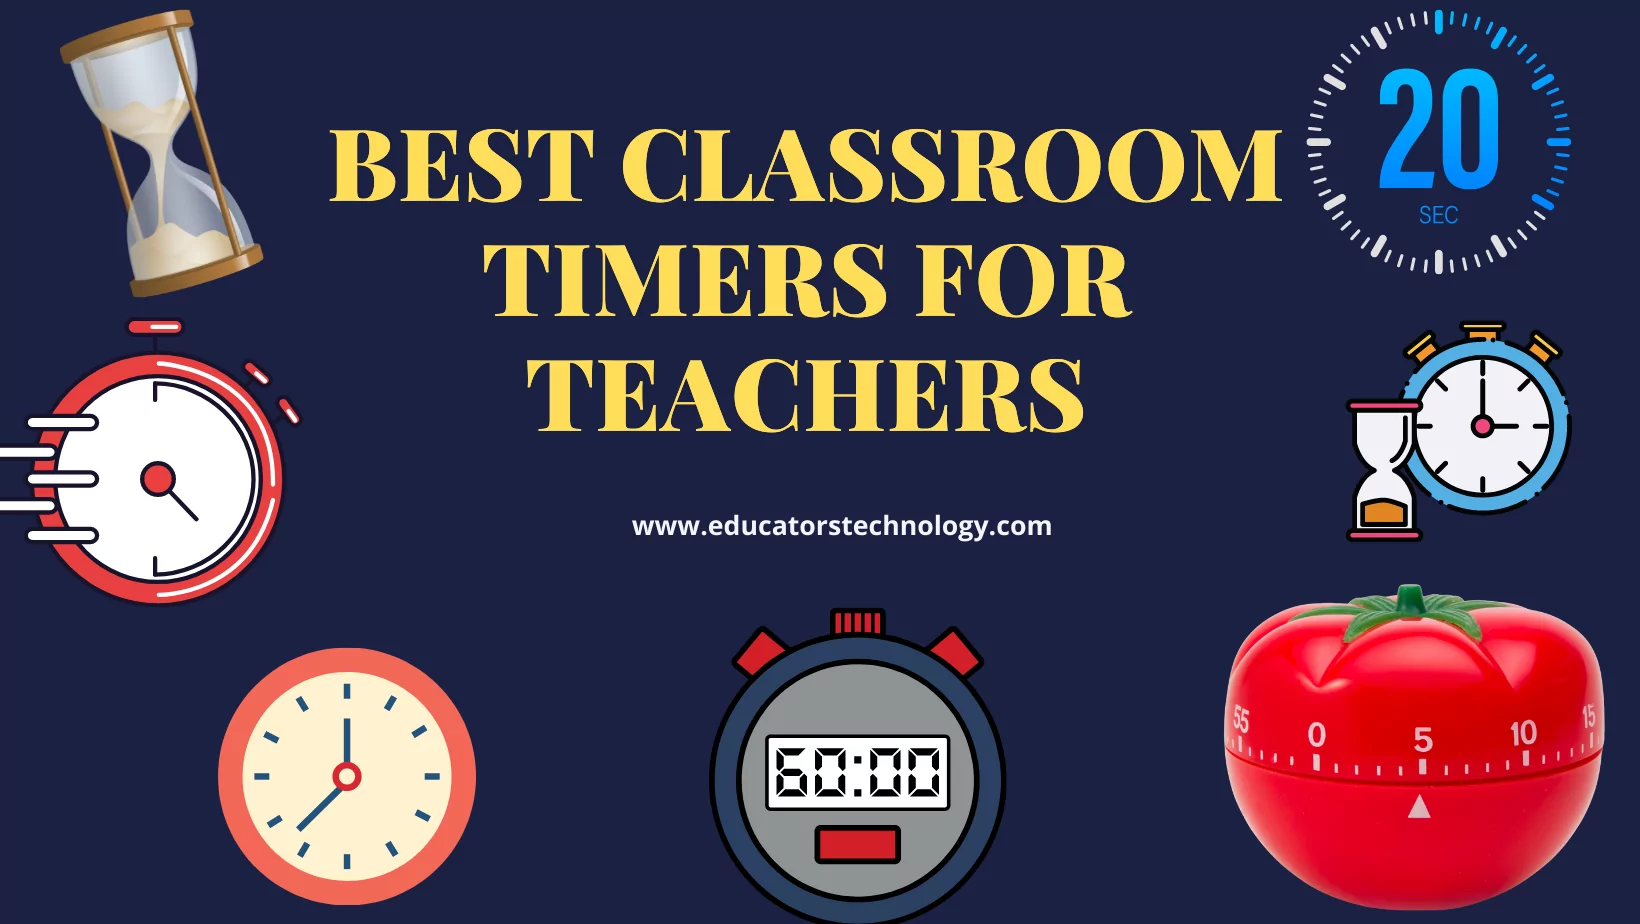 Classroom Timers - Fun Timers